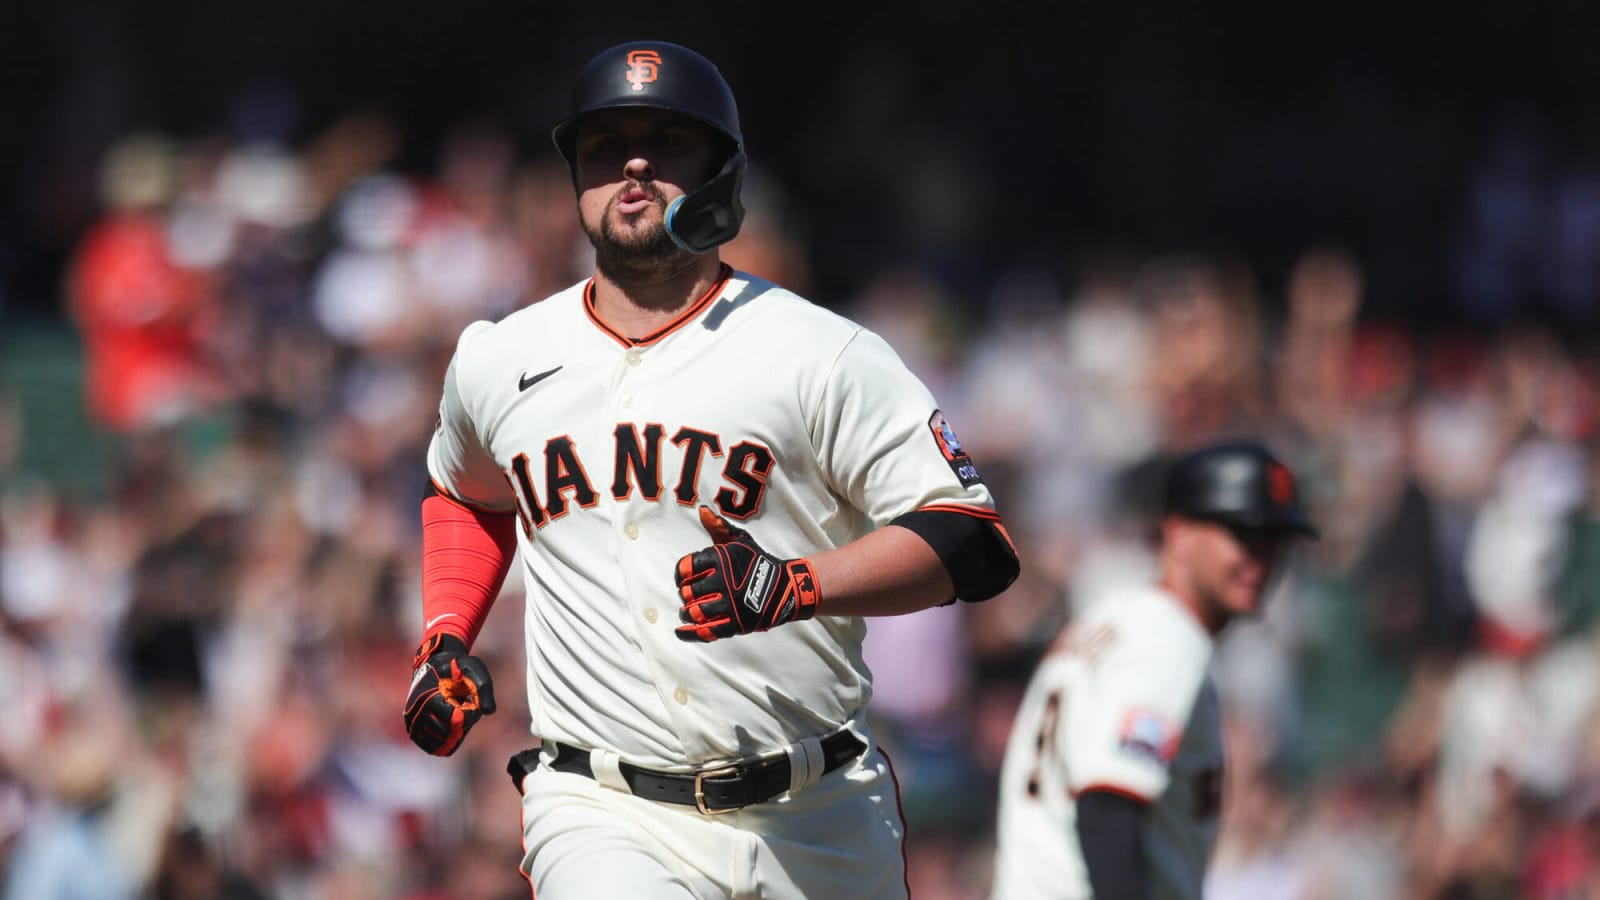 MLB Notebook: Giants place J.D. Davis on waivers, top prospect Noelvi Marte suspended 80 games after positive PED test, and more